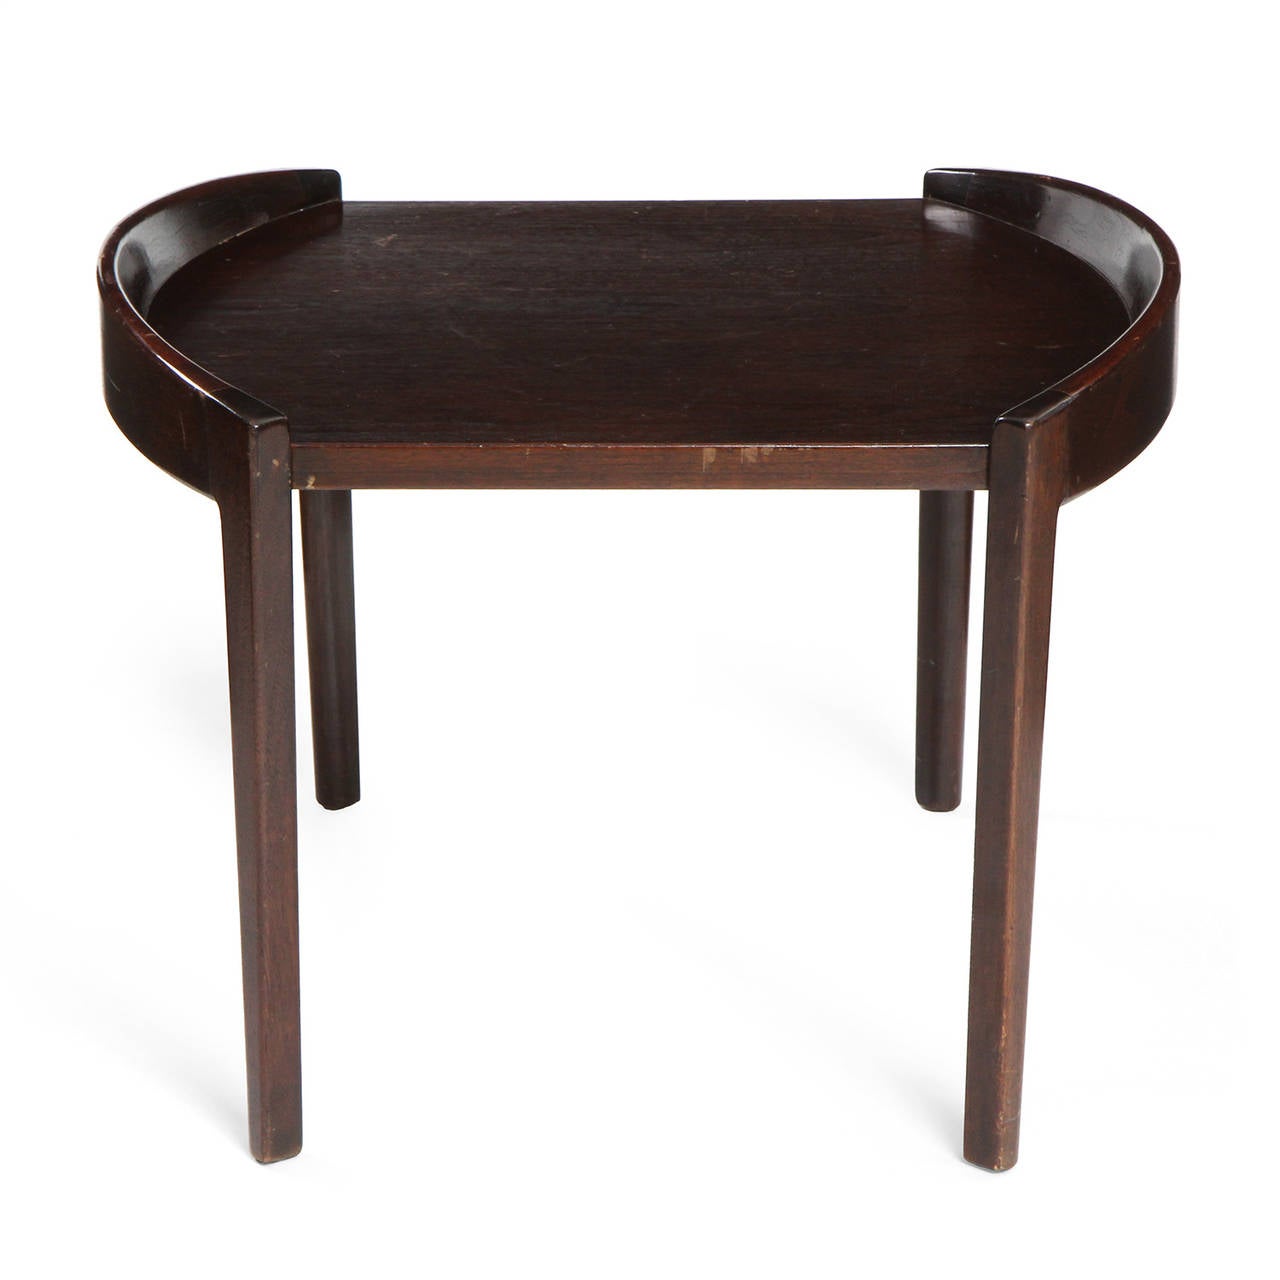 An expressive end table in rich walnut having raised and curved tapered side rails connected directly to the legs that support a floating top.